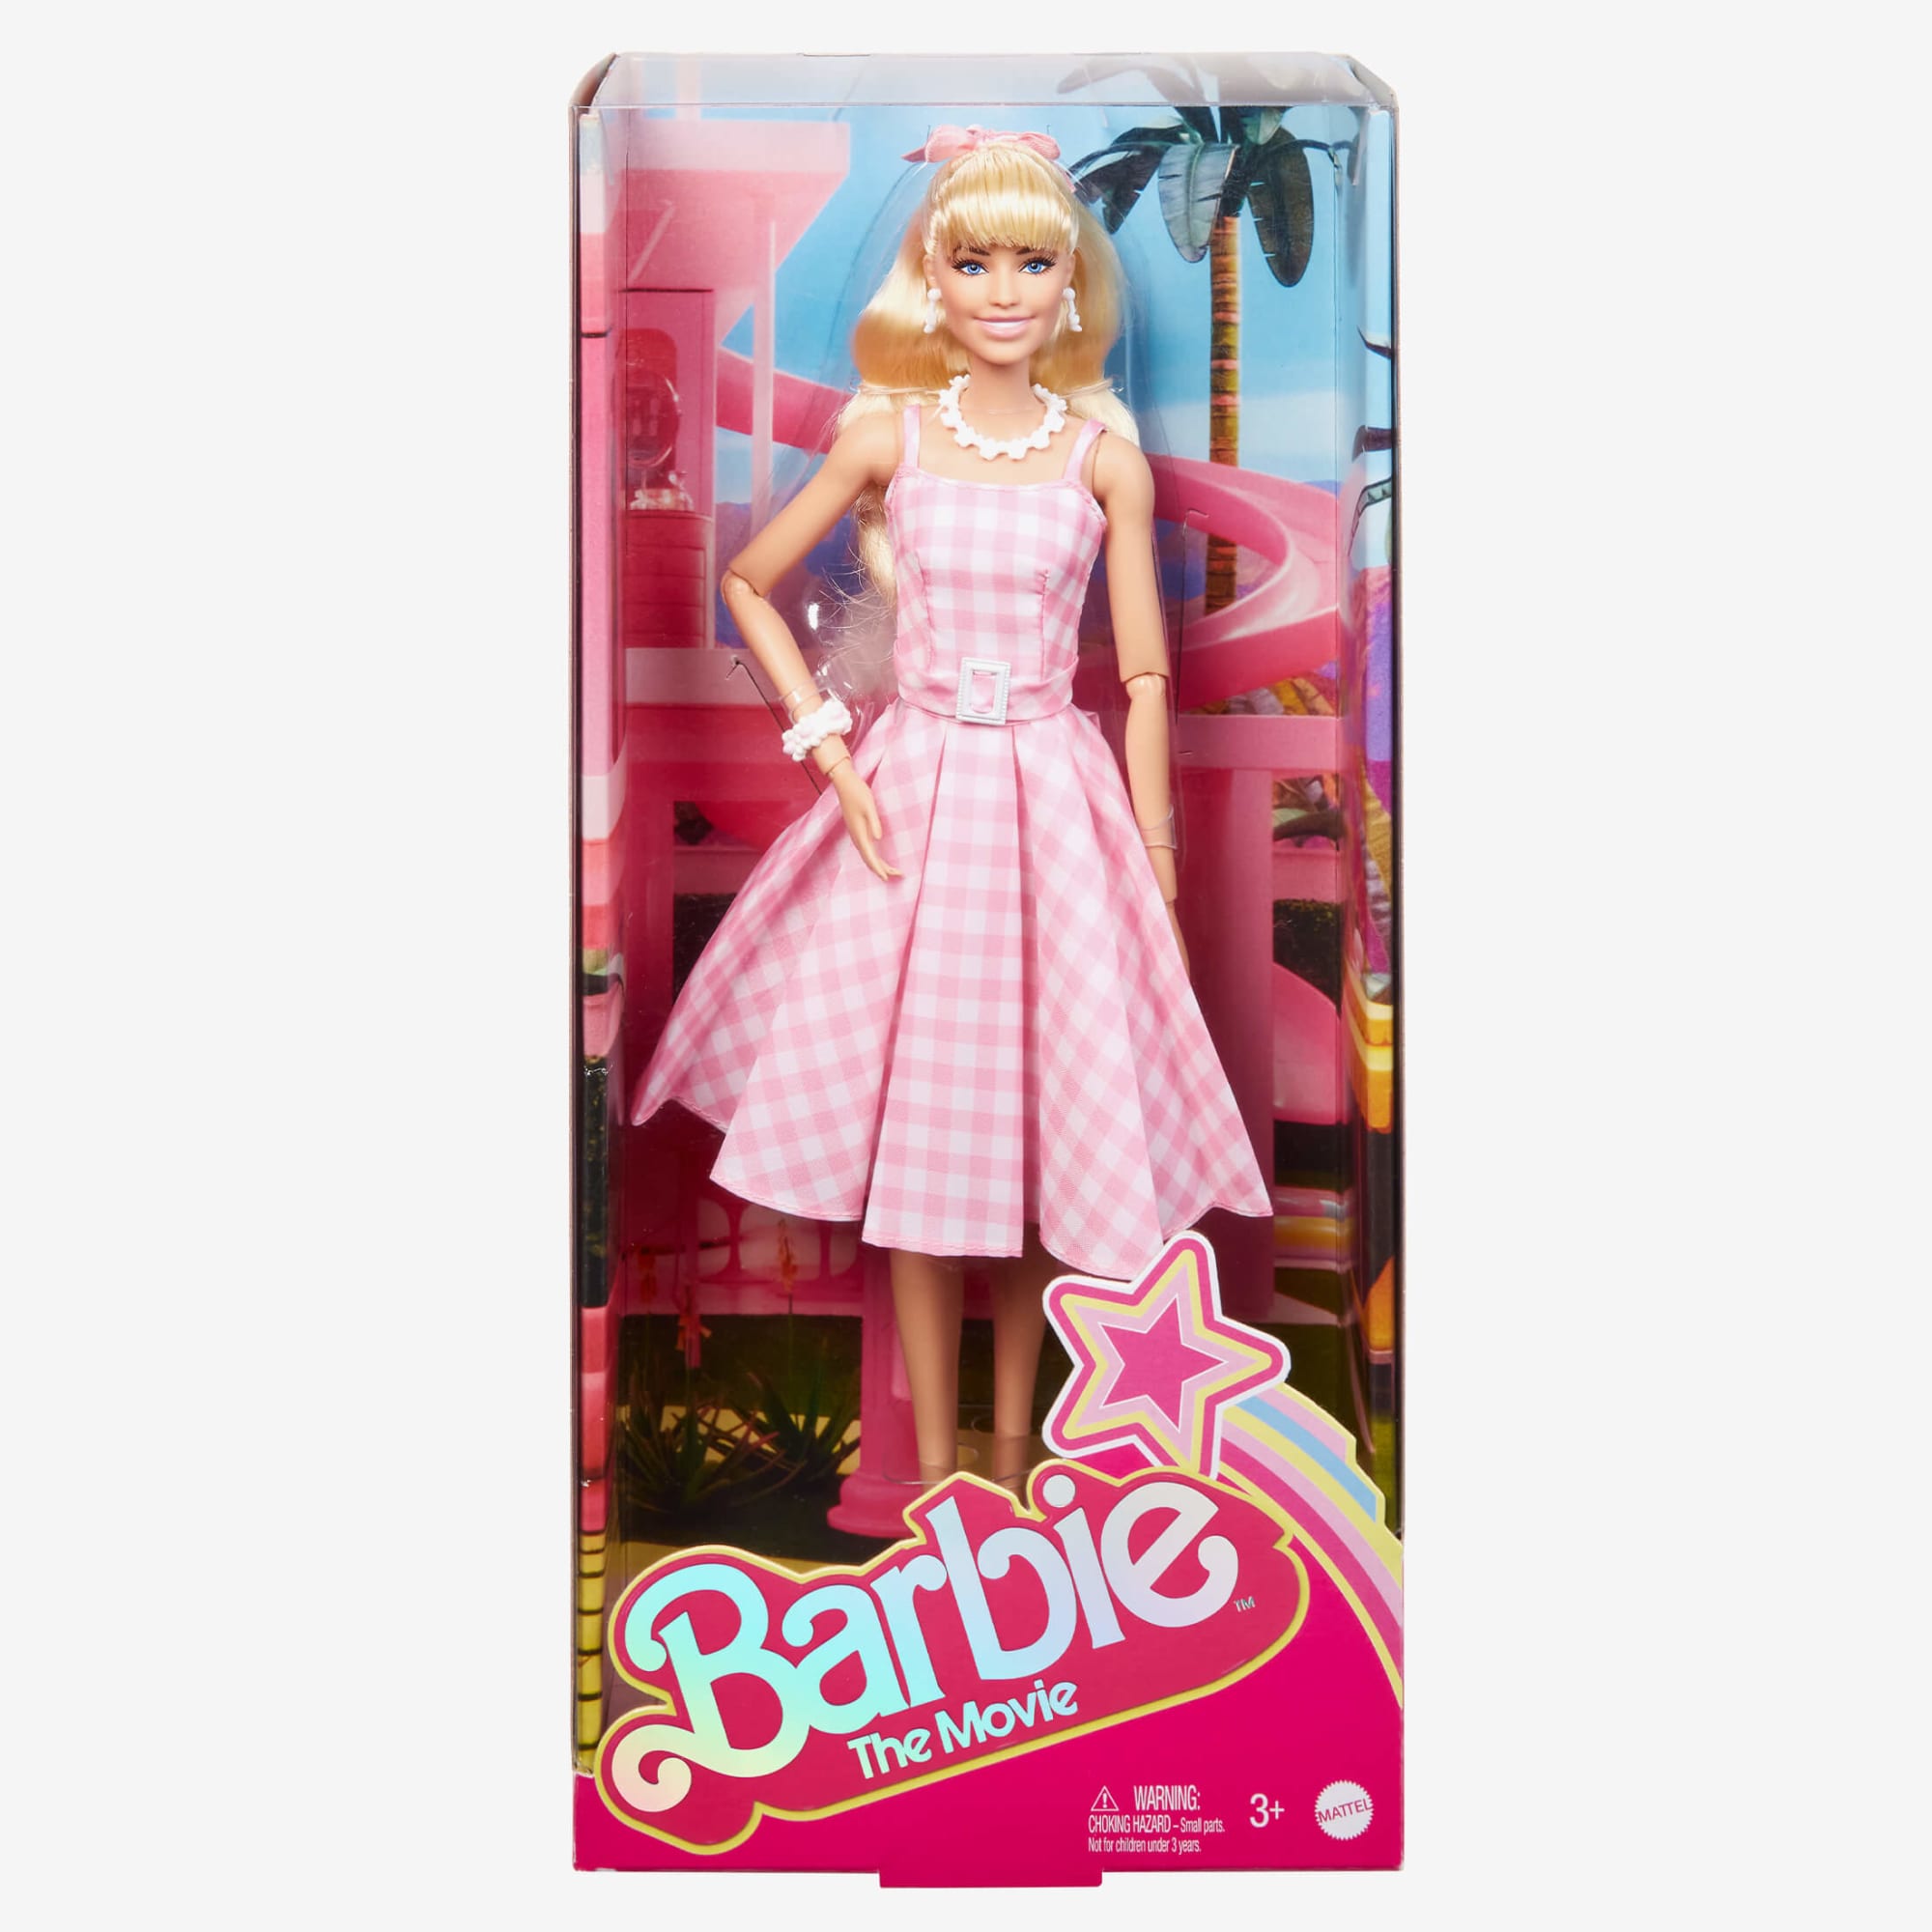 Barbie Daisy Cafe 2003 Mattel Pink Red Daisy Print Dress Doll Toy Movie